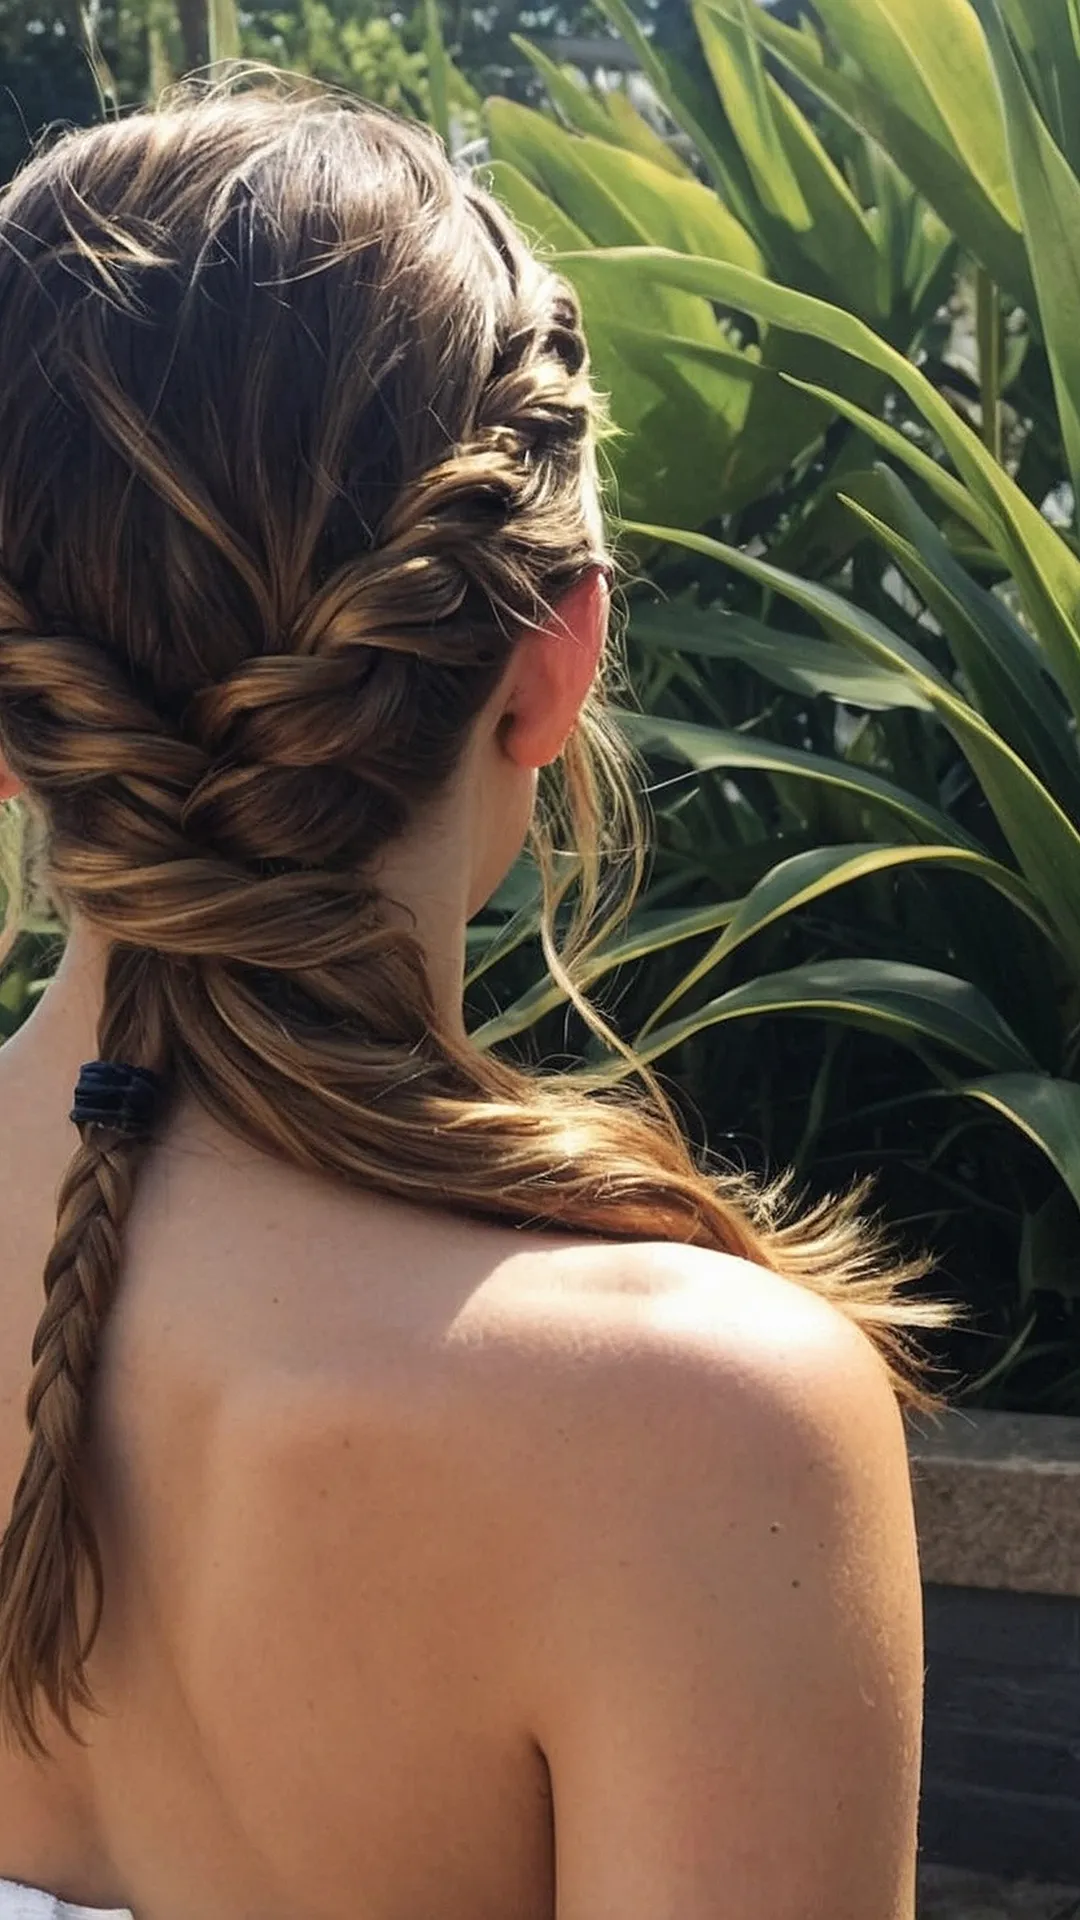 Wet and Wonderful: Pool Hairstyle Inspiration